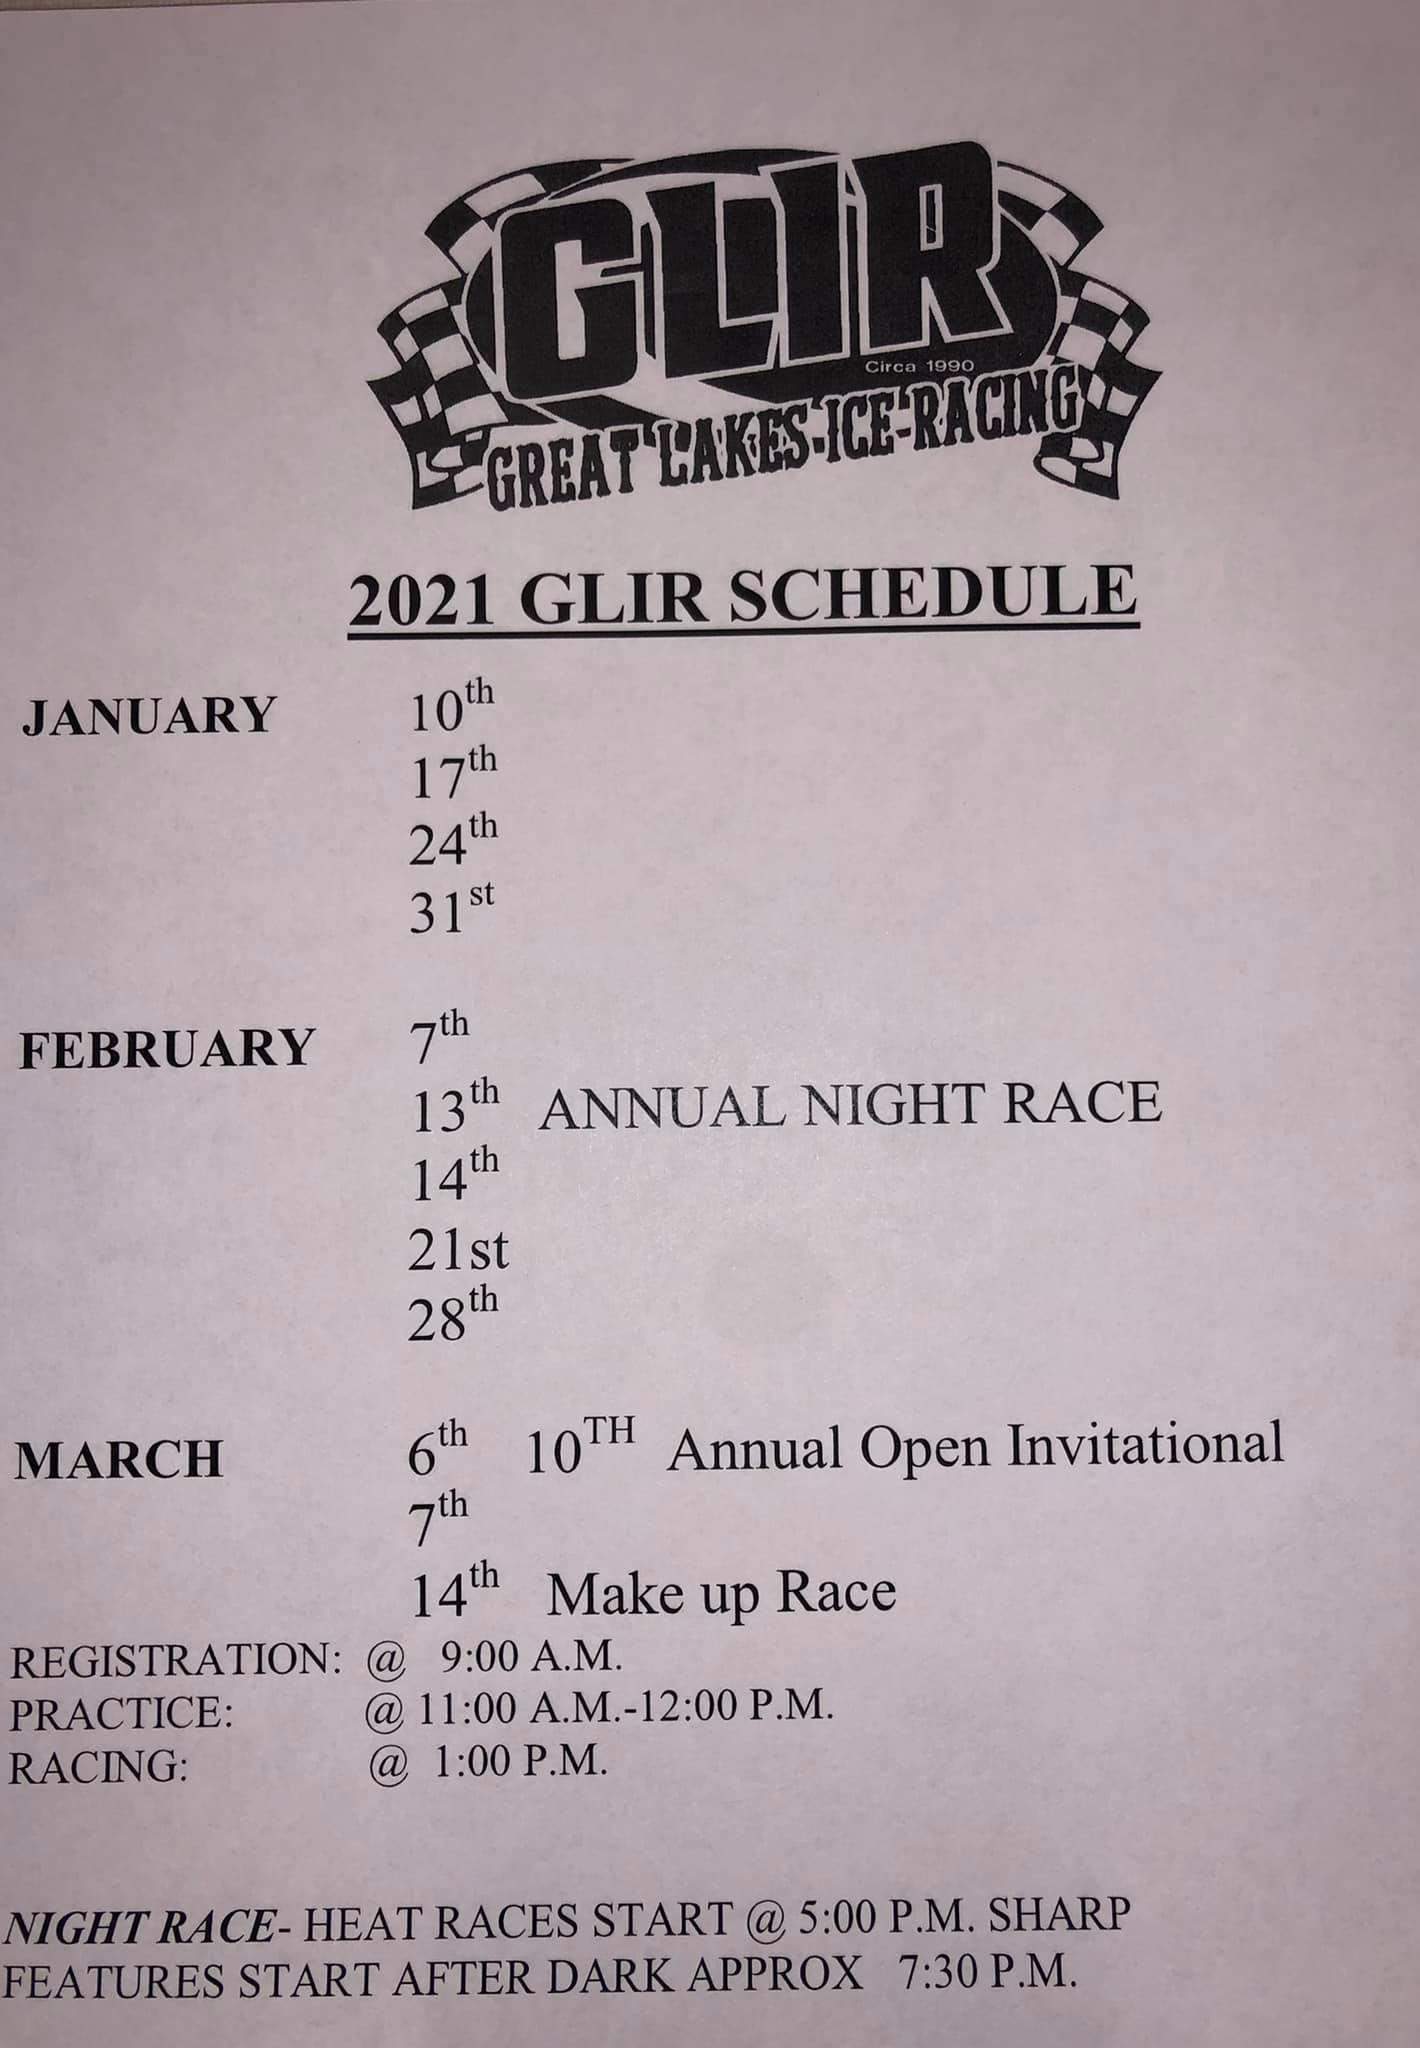 Great lakes ice racing 2021 schedule